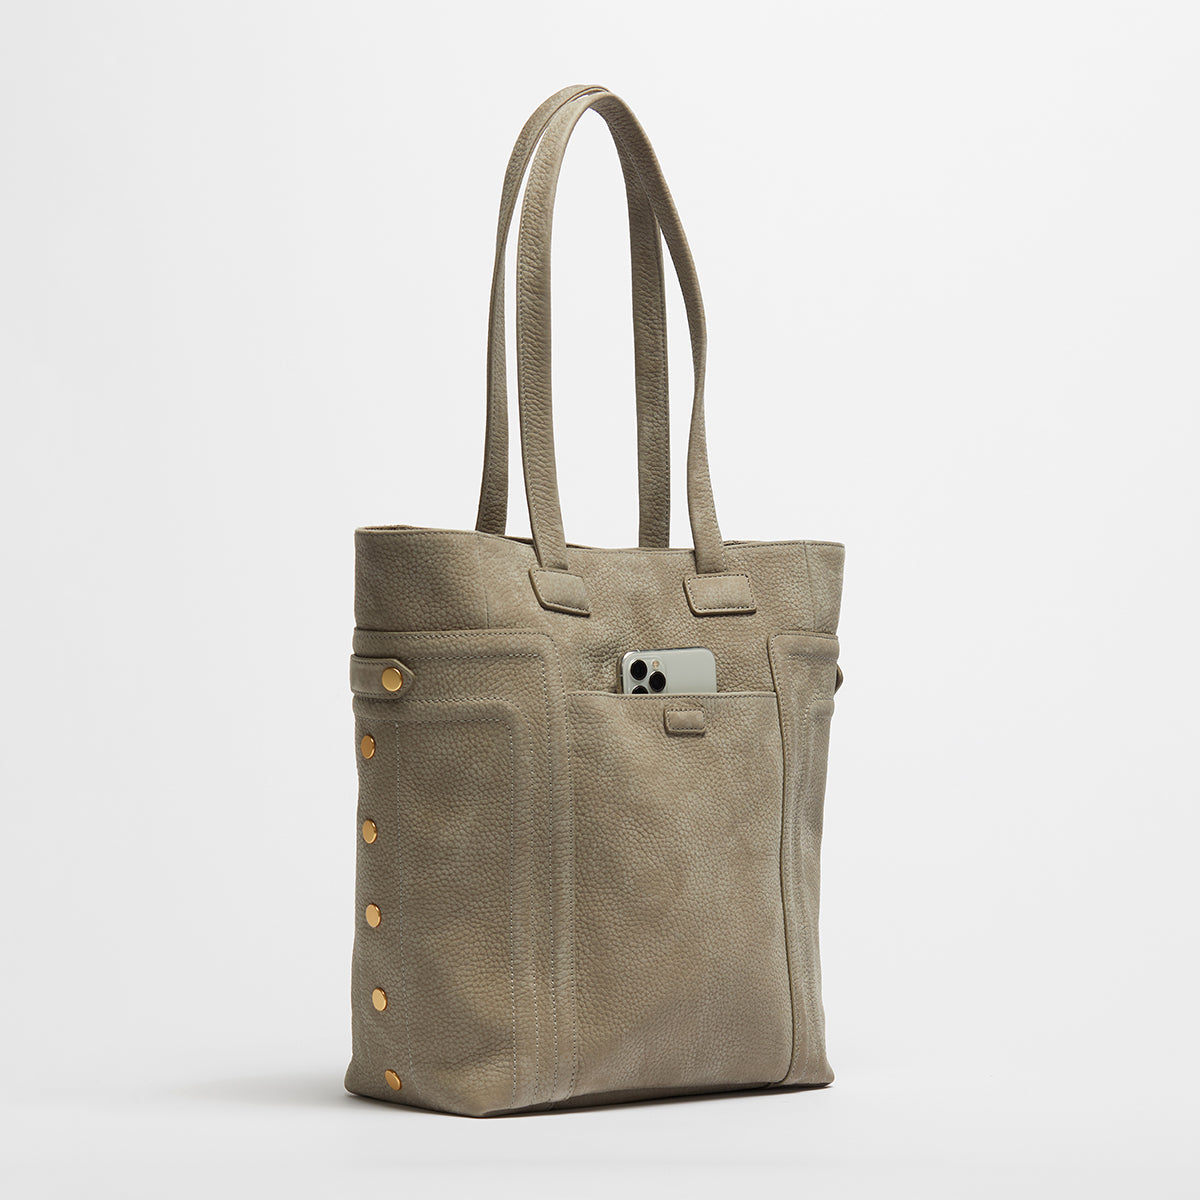 Otis Tote | Natural Grey Nubuck Leather Tote for Everyday